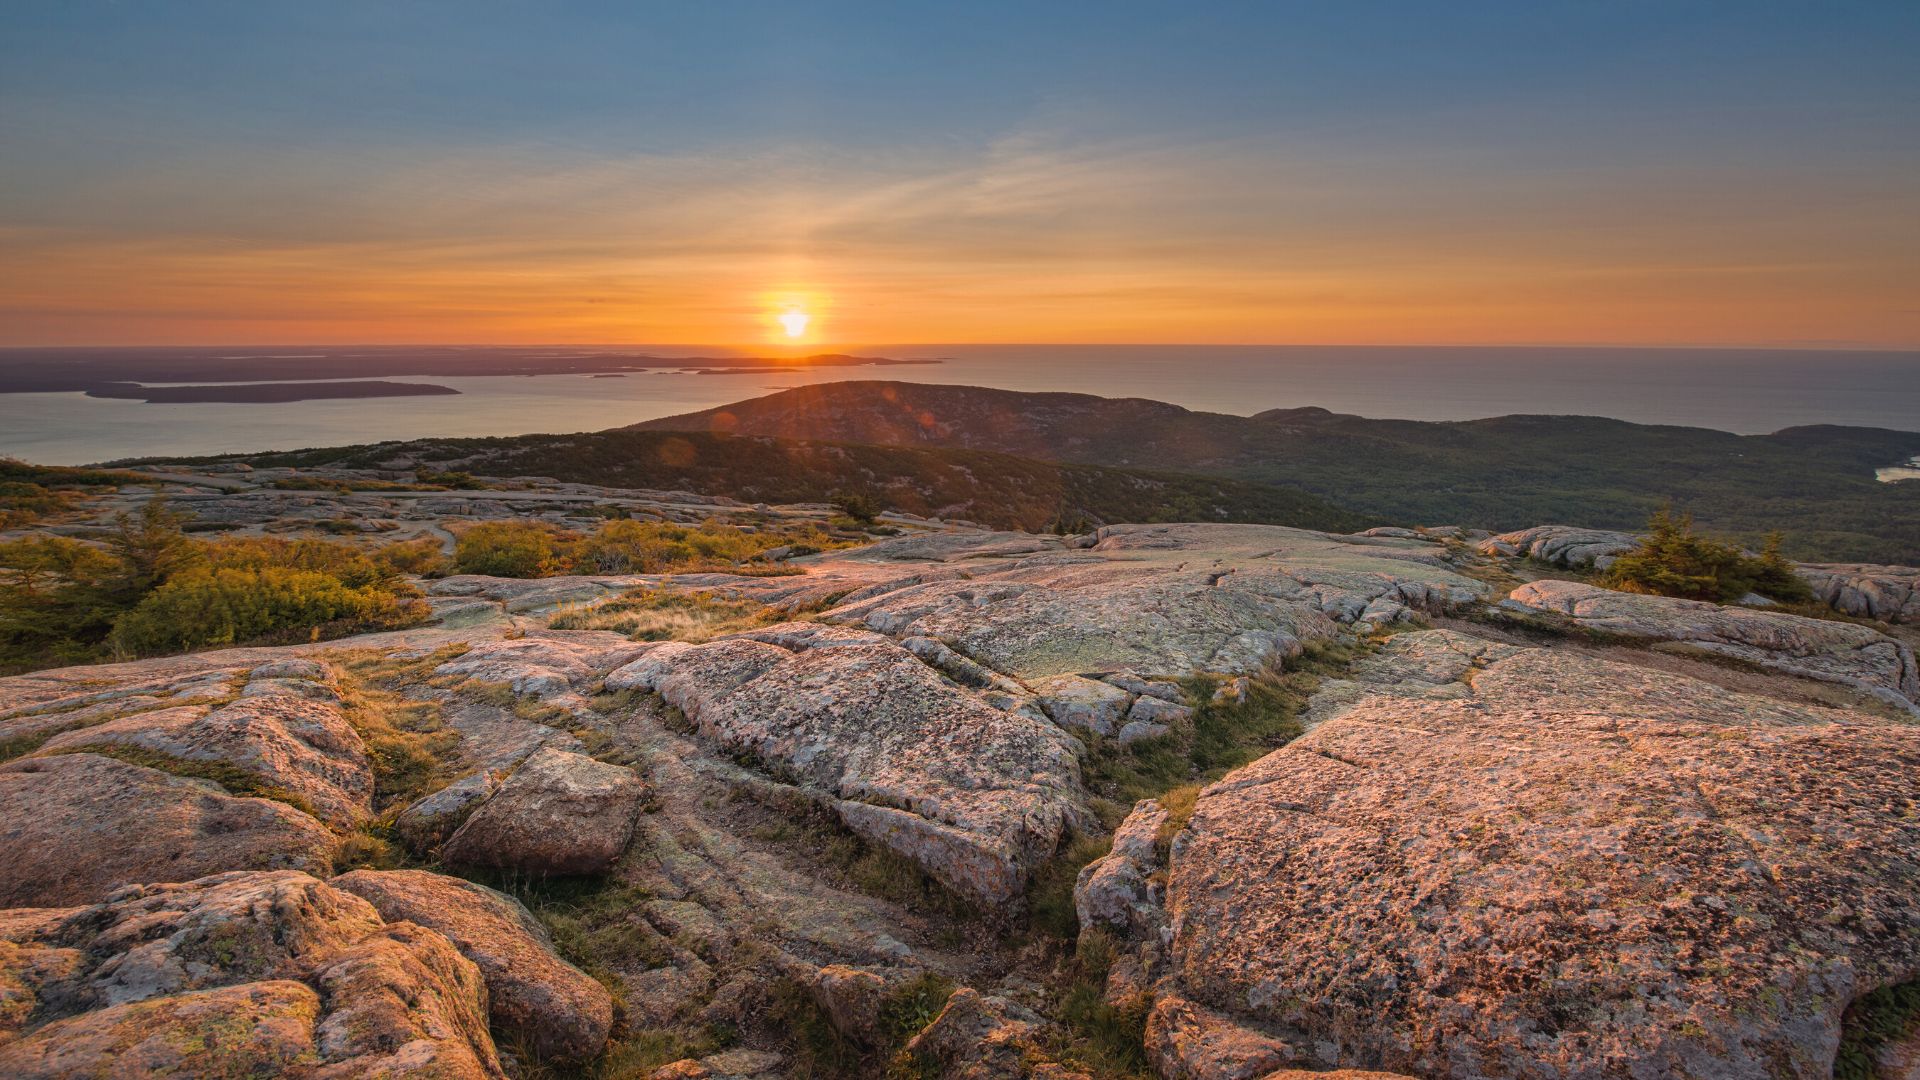 From the foreground on the rocky top of Cadillac Mountain you see the distant sun rise over the Atlantic